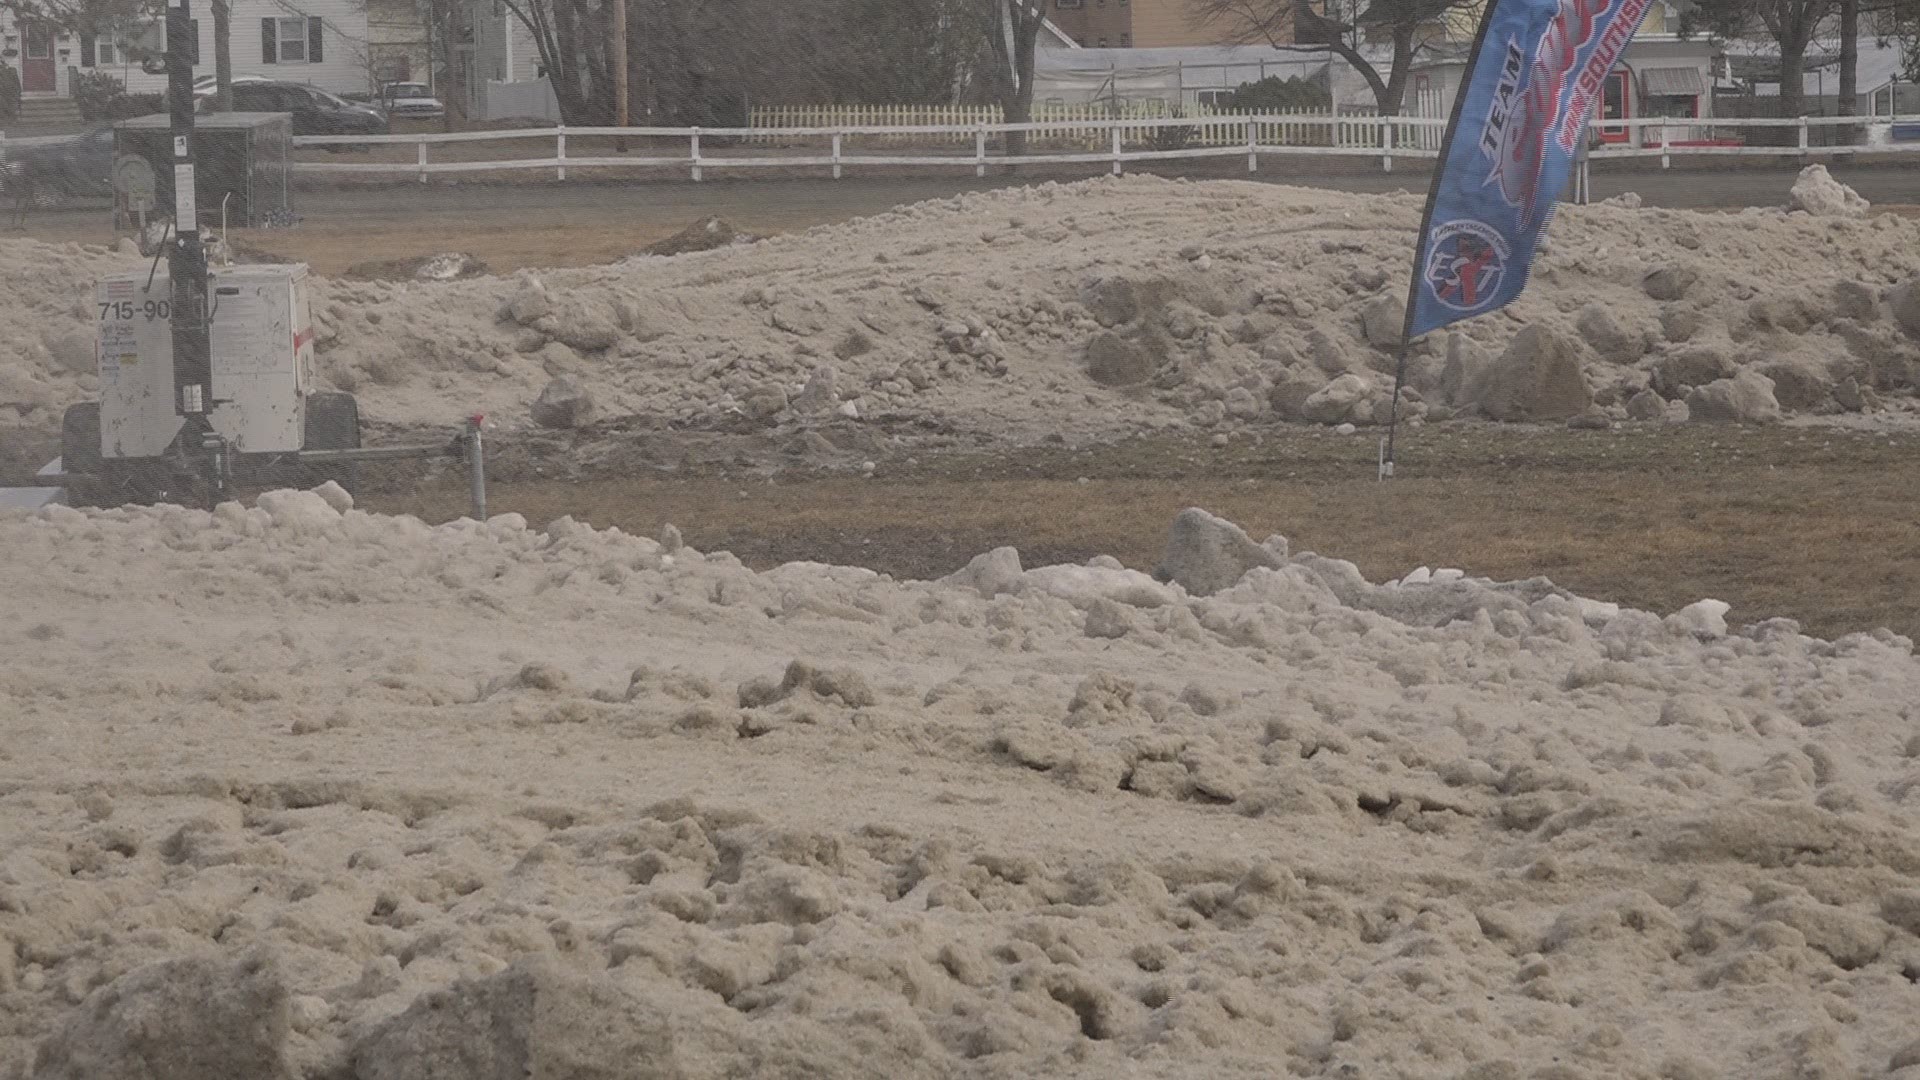 Despite most sporting events being postponed or cancelled, a snocross racing event in Bangor went ahead as planned.